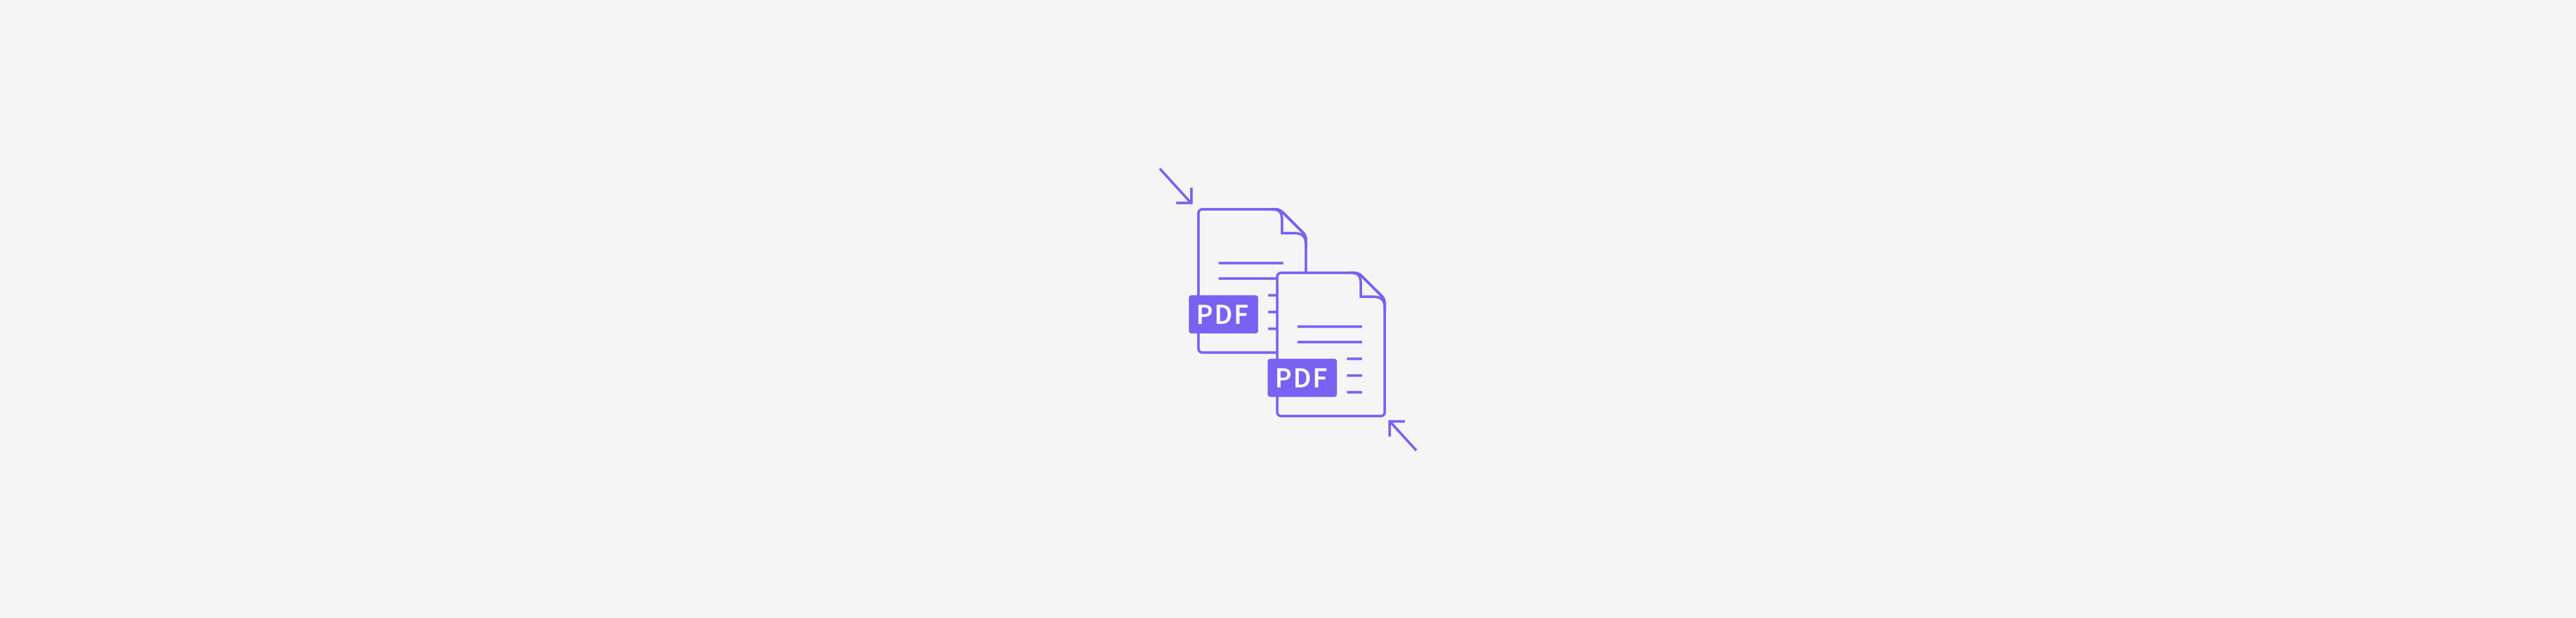 how-to-combine-multiple-pdf-files-into-one-document_2x.png